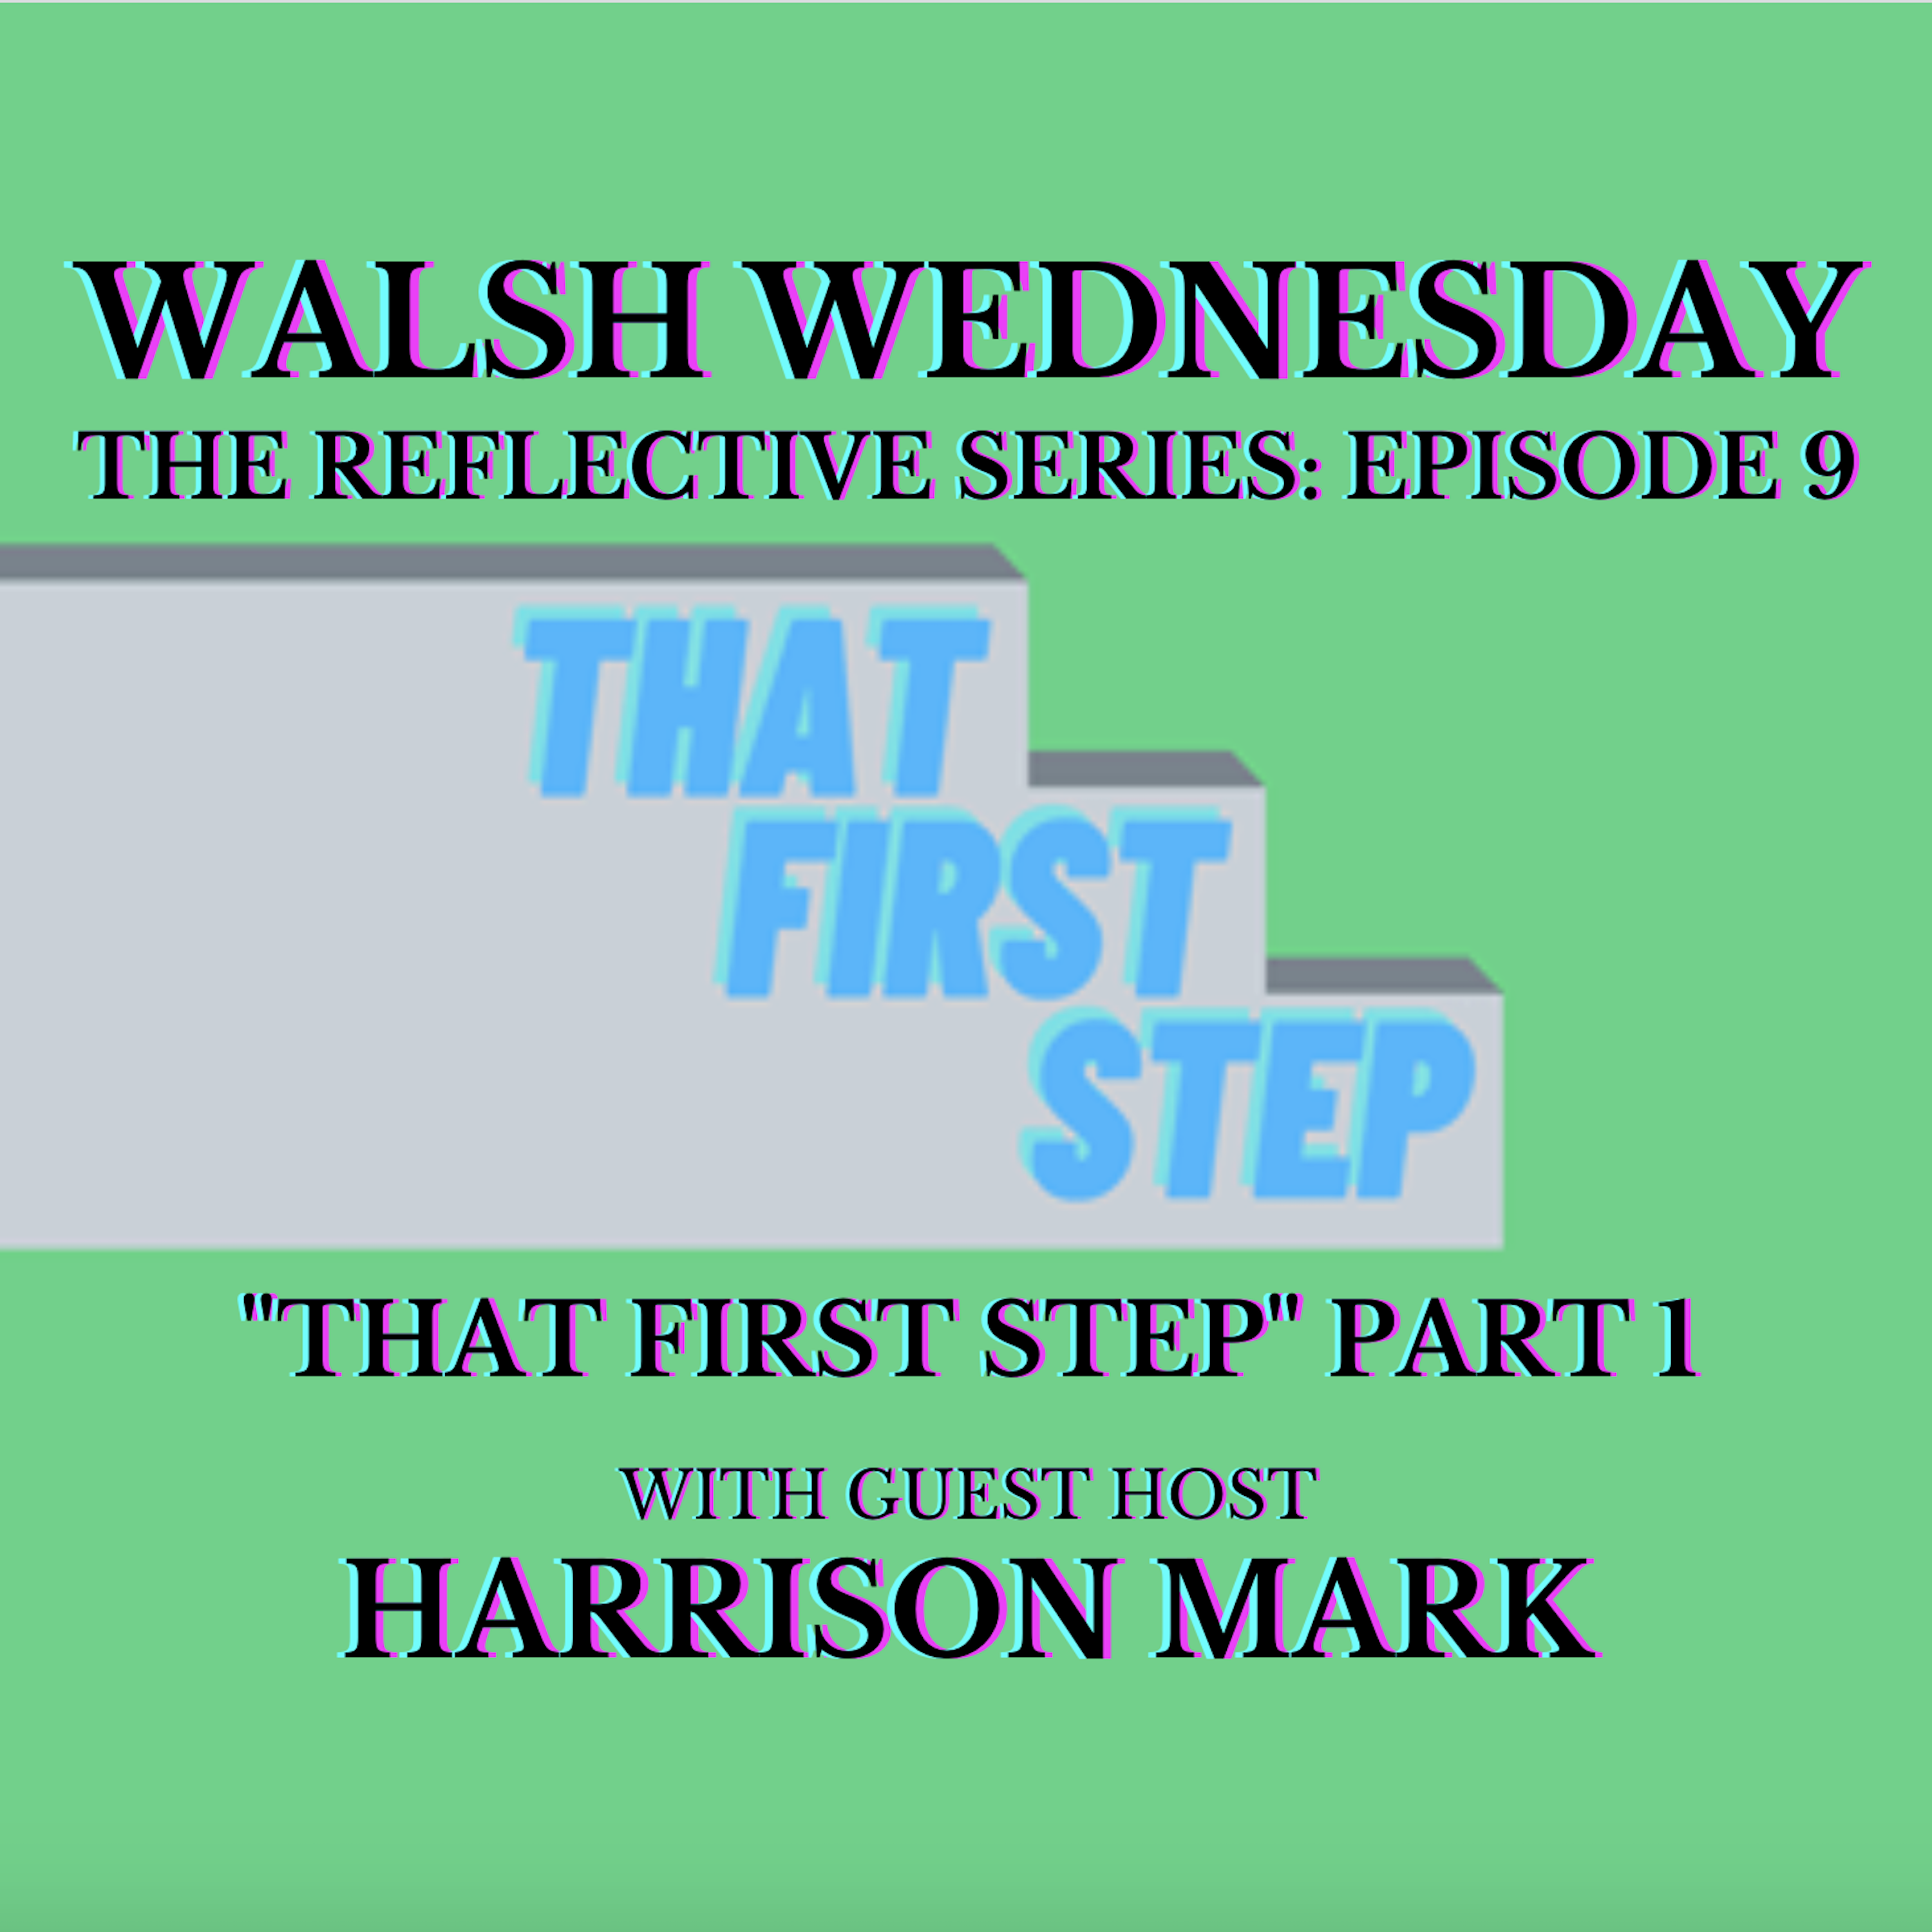 "That First Step" Part 1